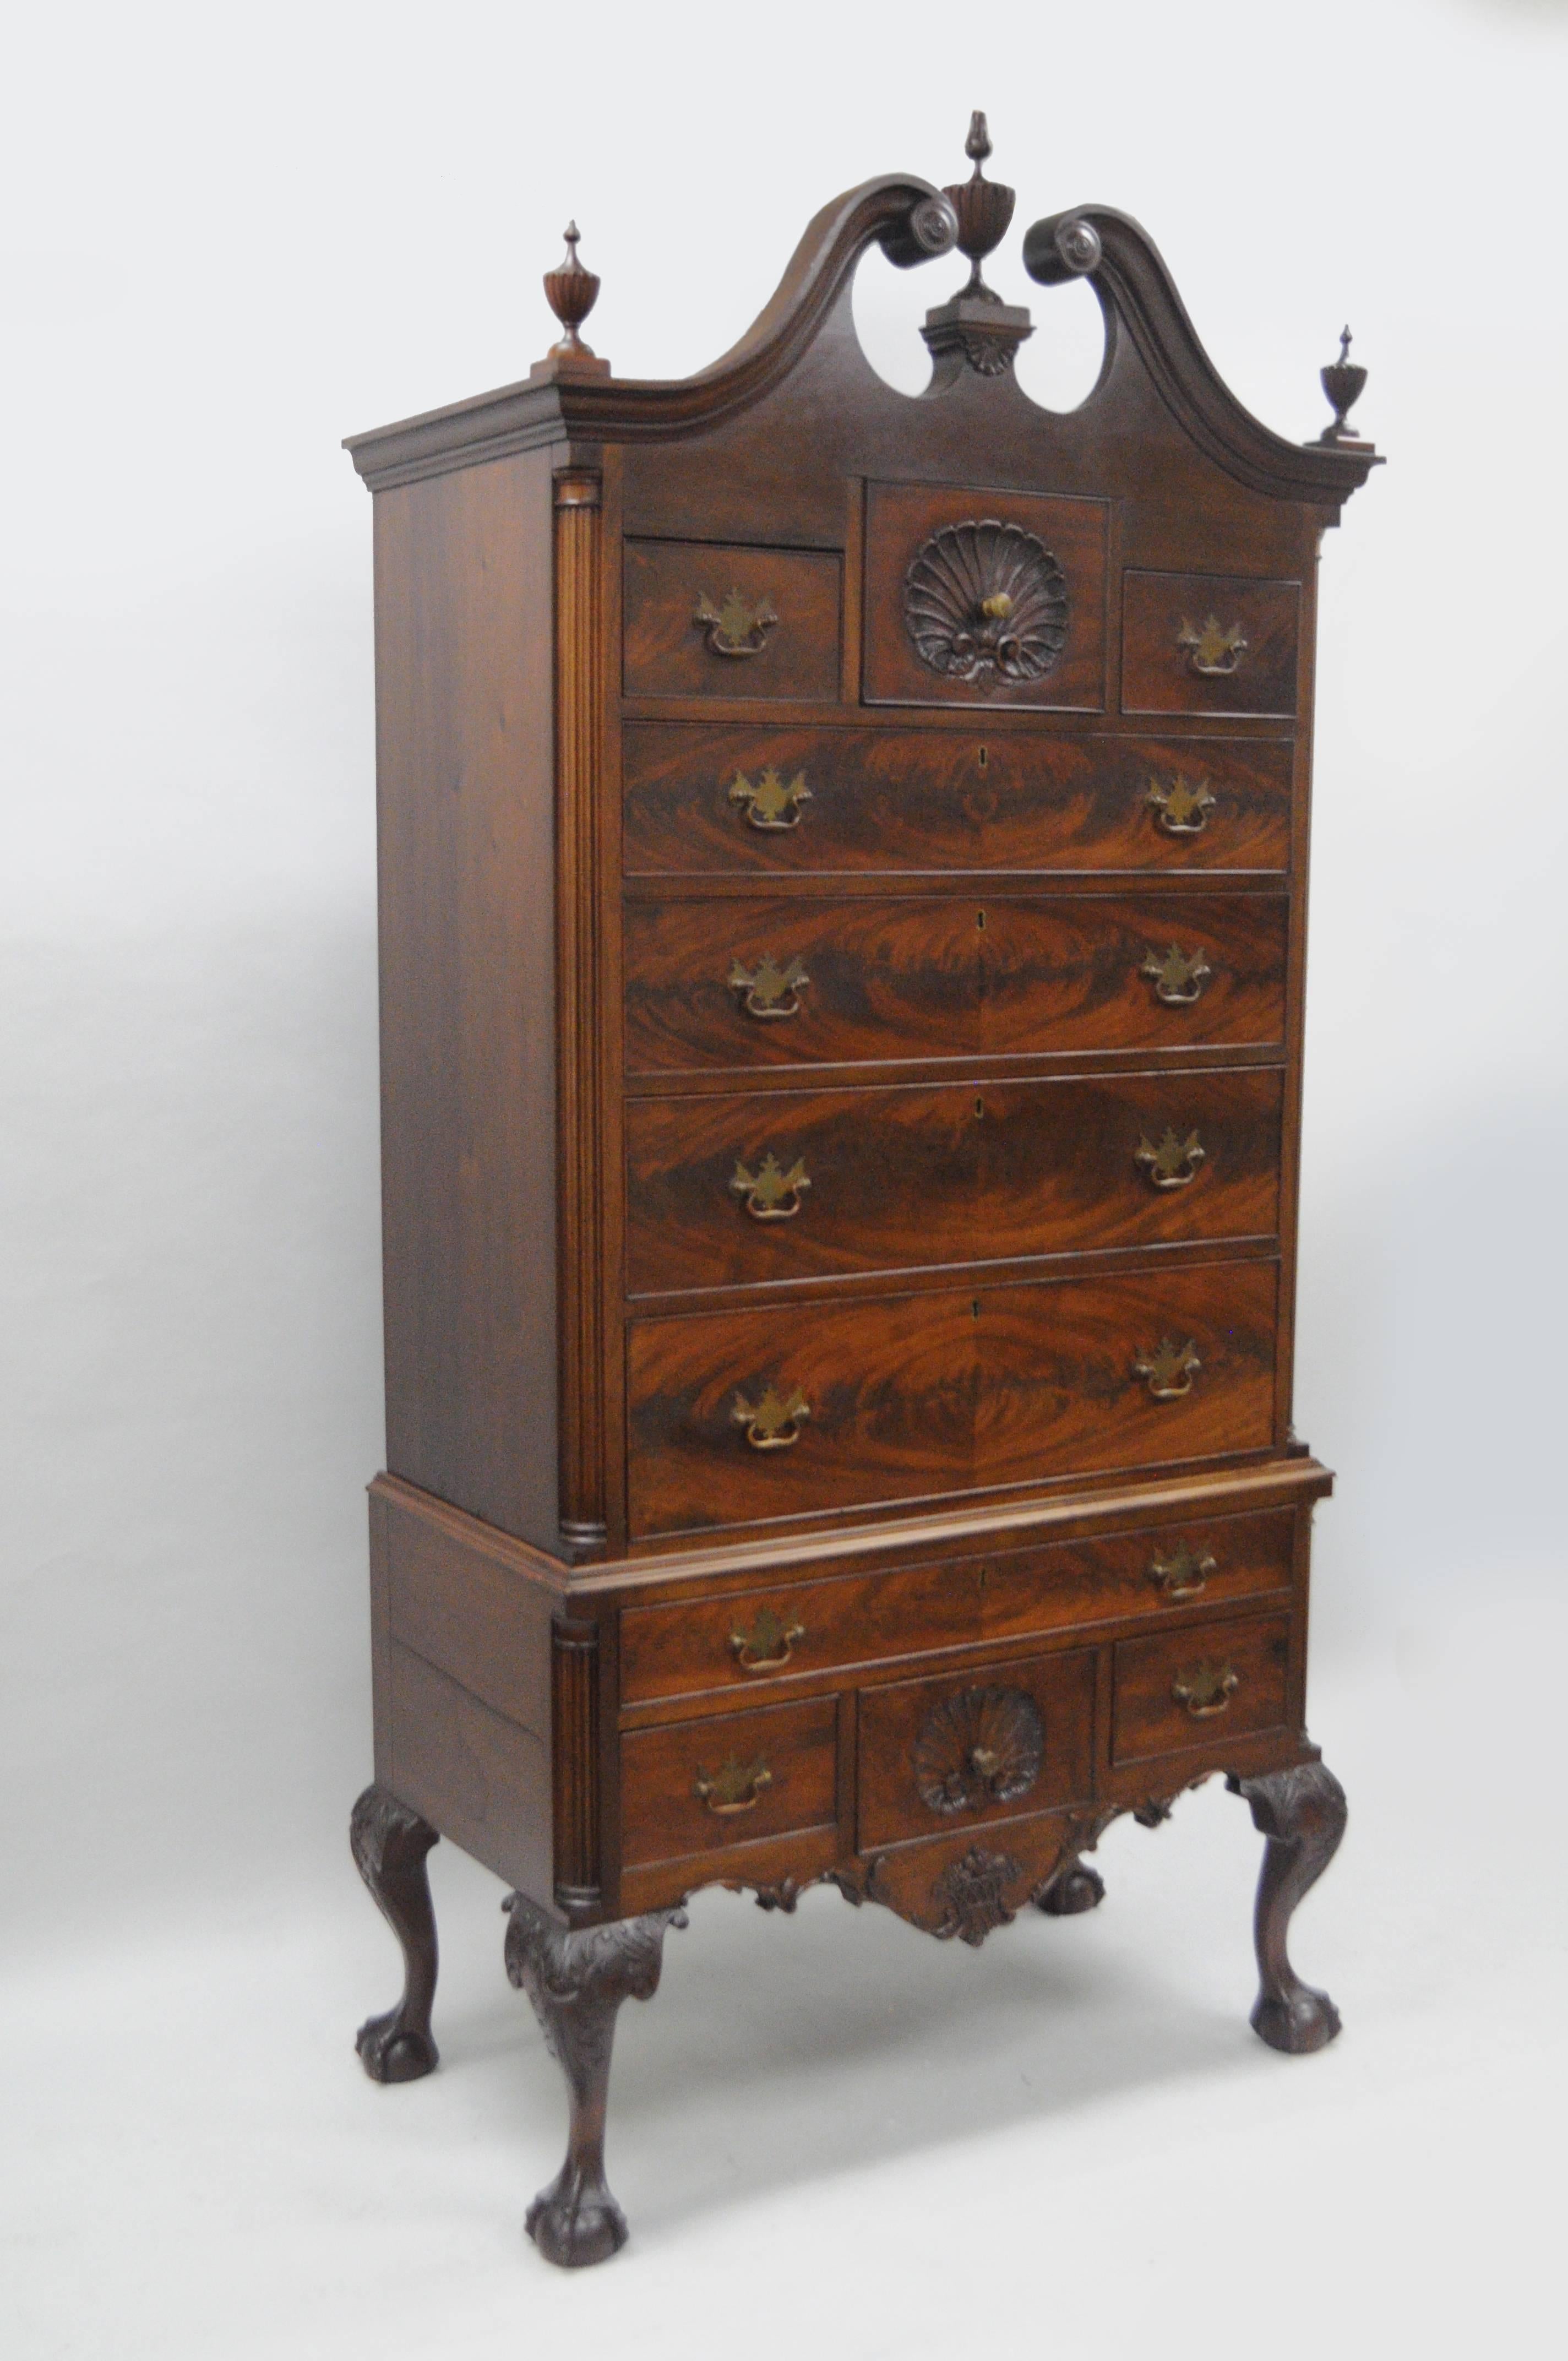 19th C. Crotch Mahogany Chippendale Ball and Claw Highboy Tall Chest of Drawers For Sale 1